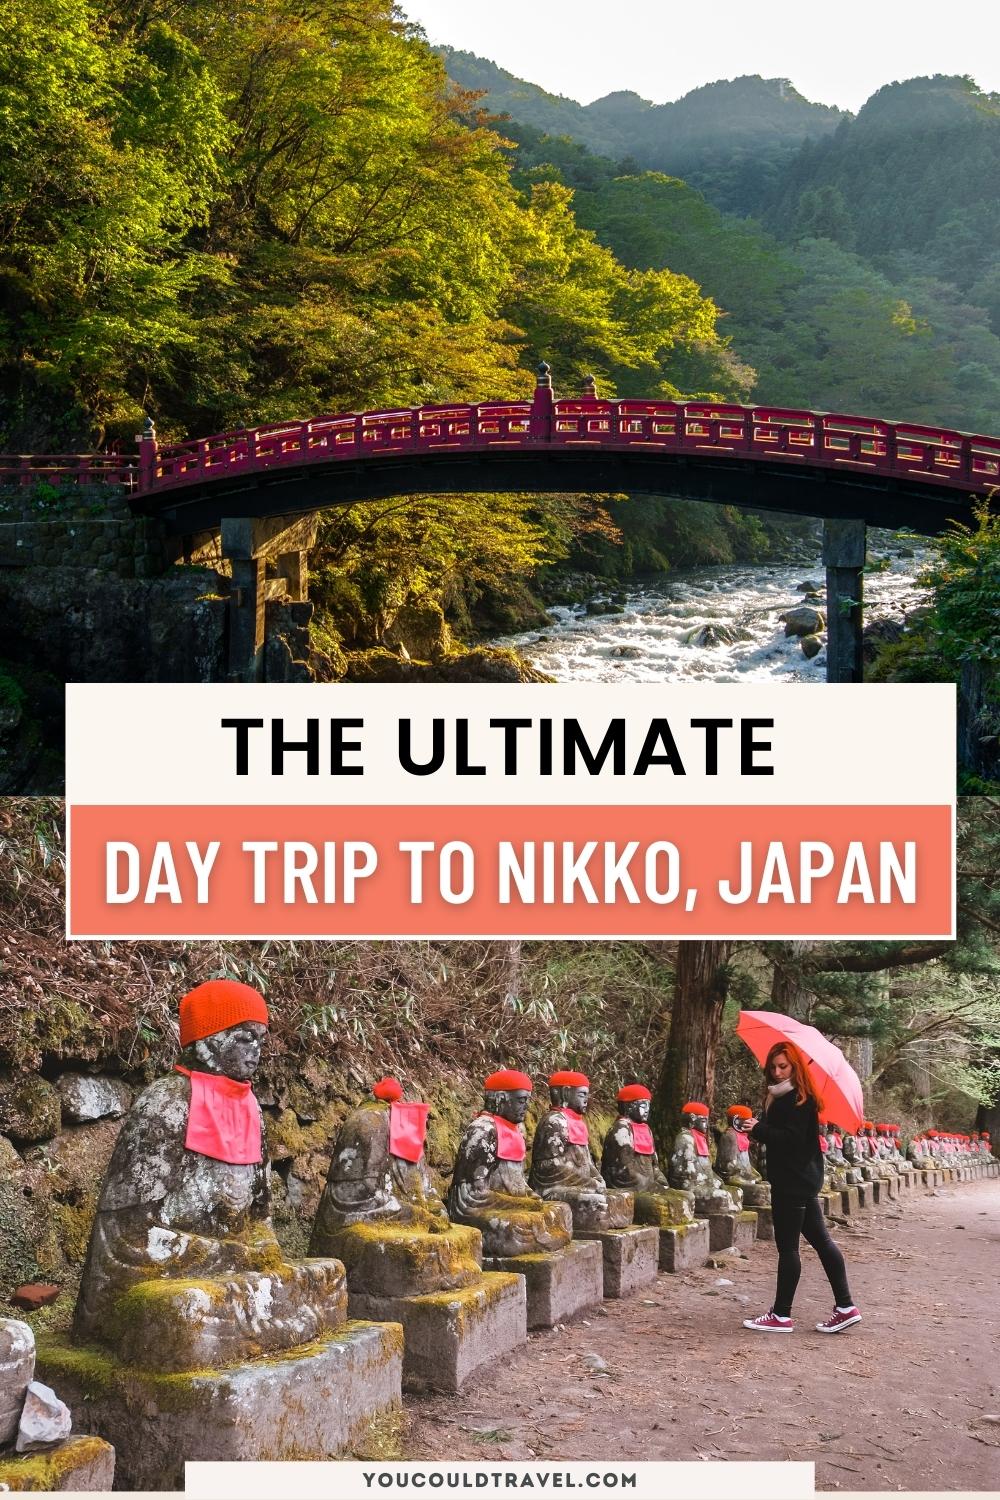 The ideal day trip to Nikko (step by step itineray)